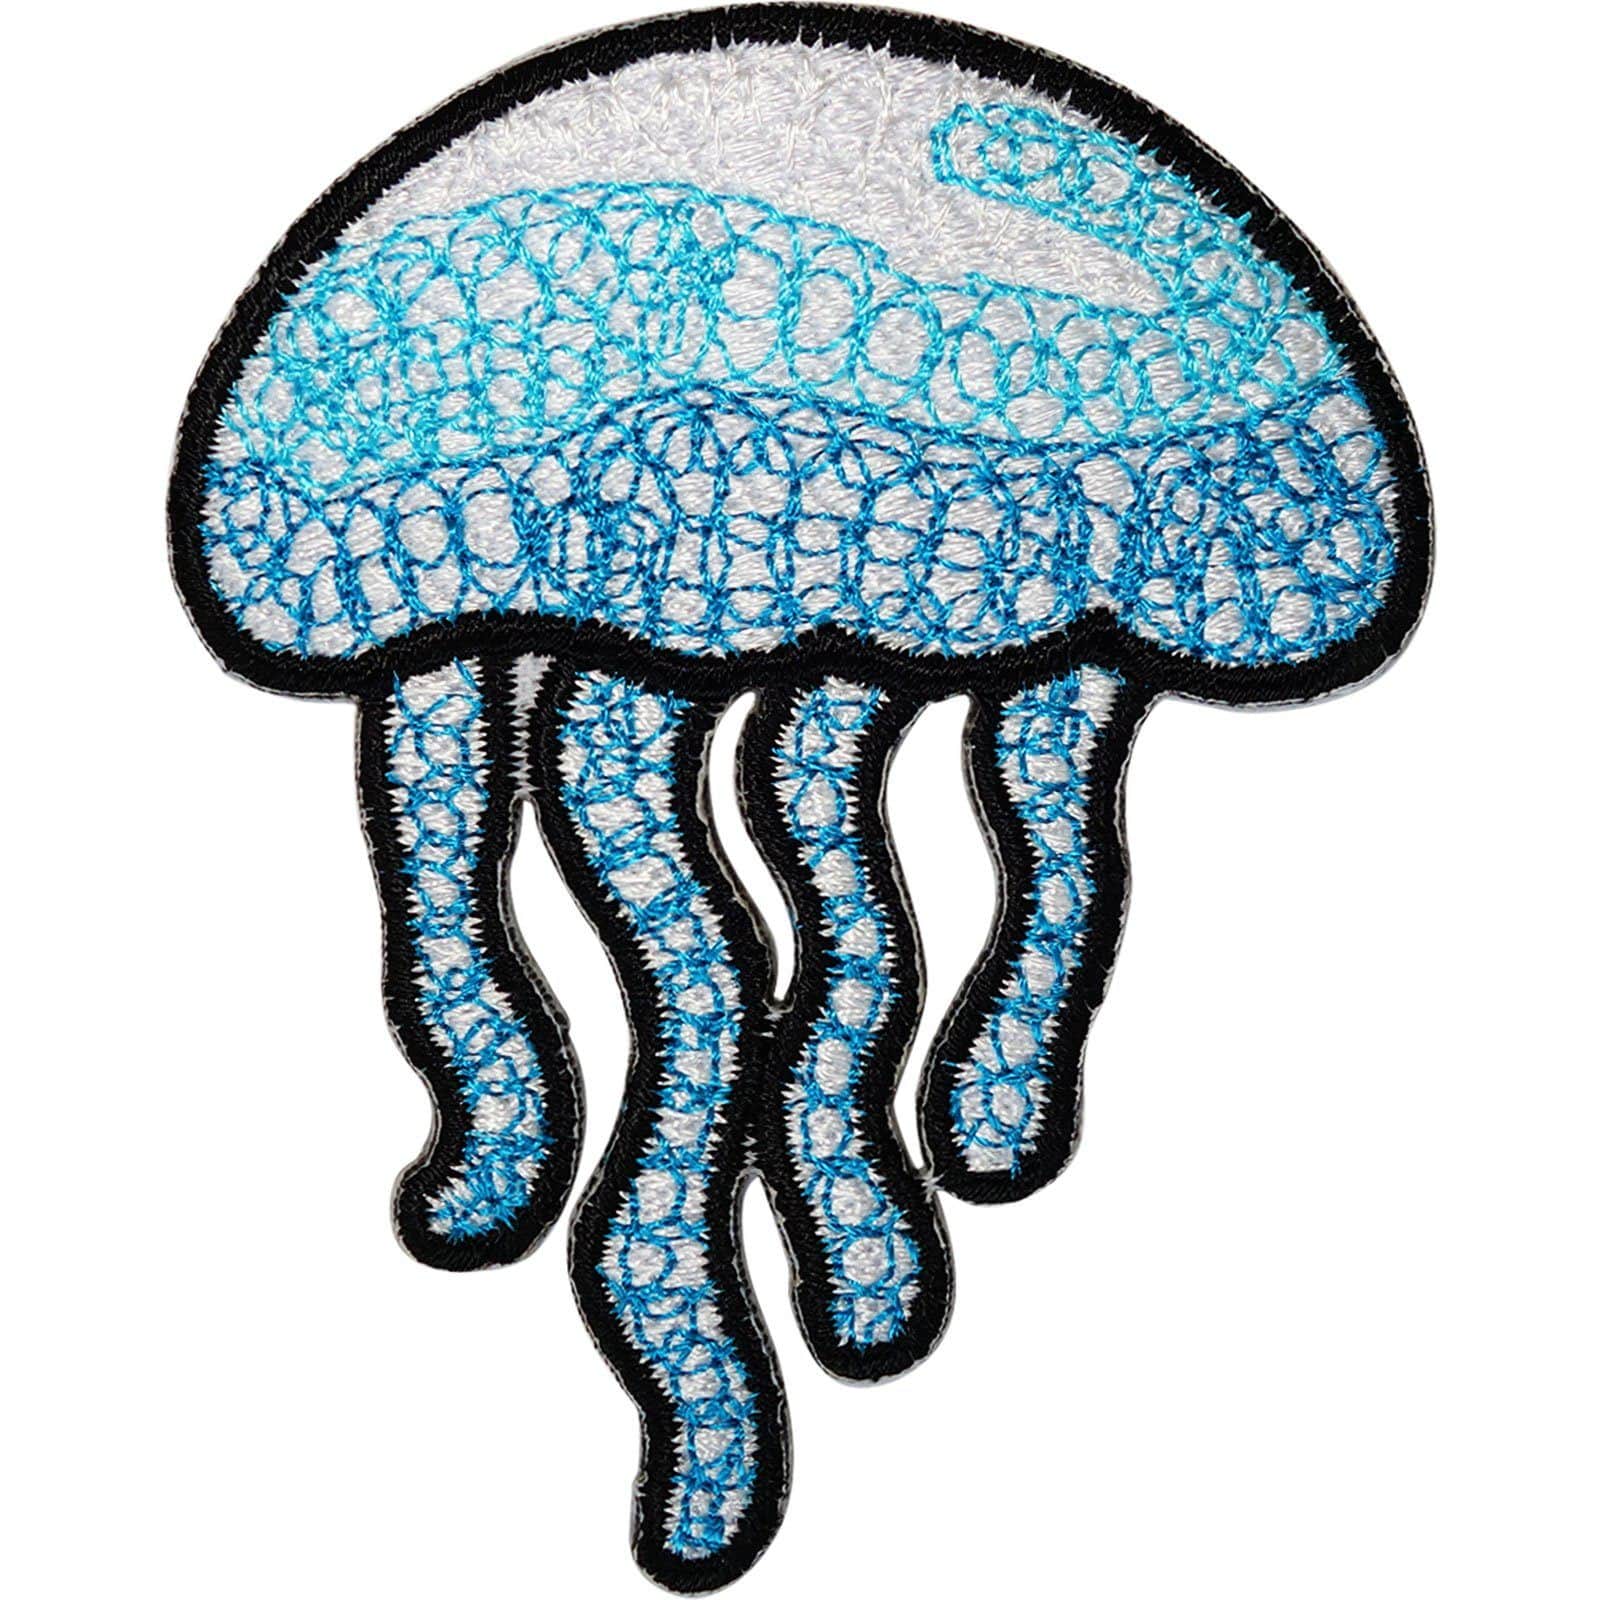 Jellyfish Patch Iron On Sew On Jelly Fish Embroidered Badge Embroidery Applique